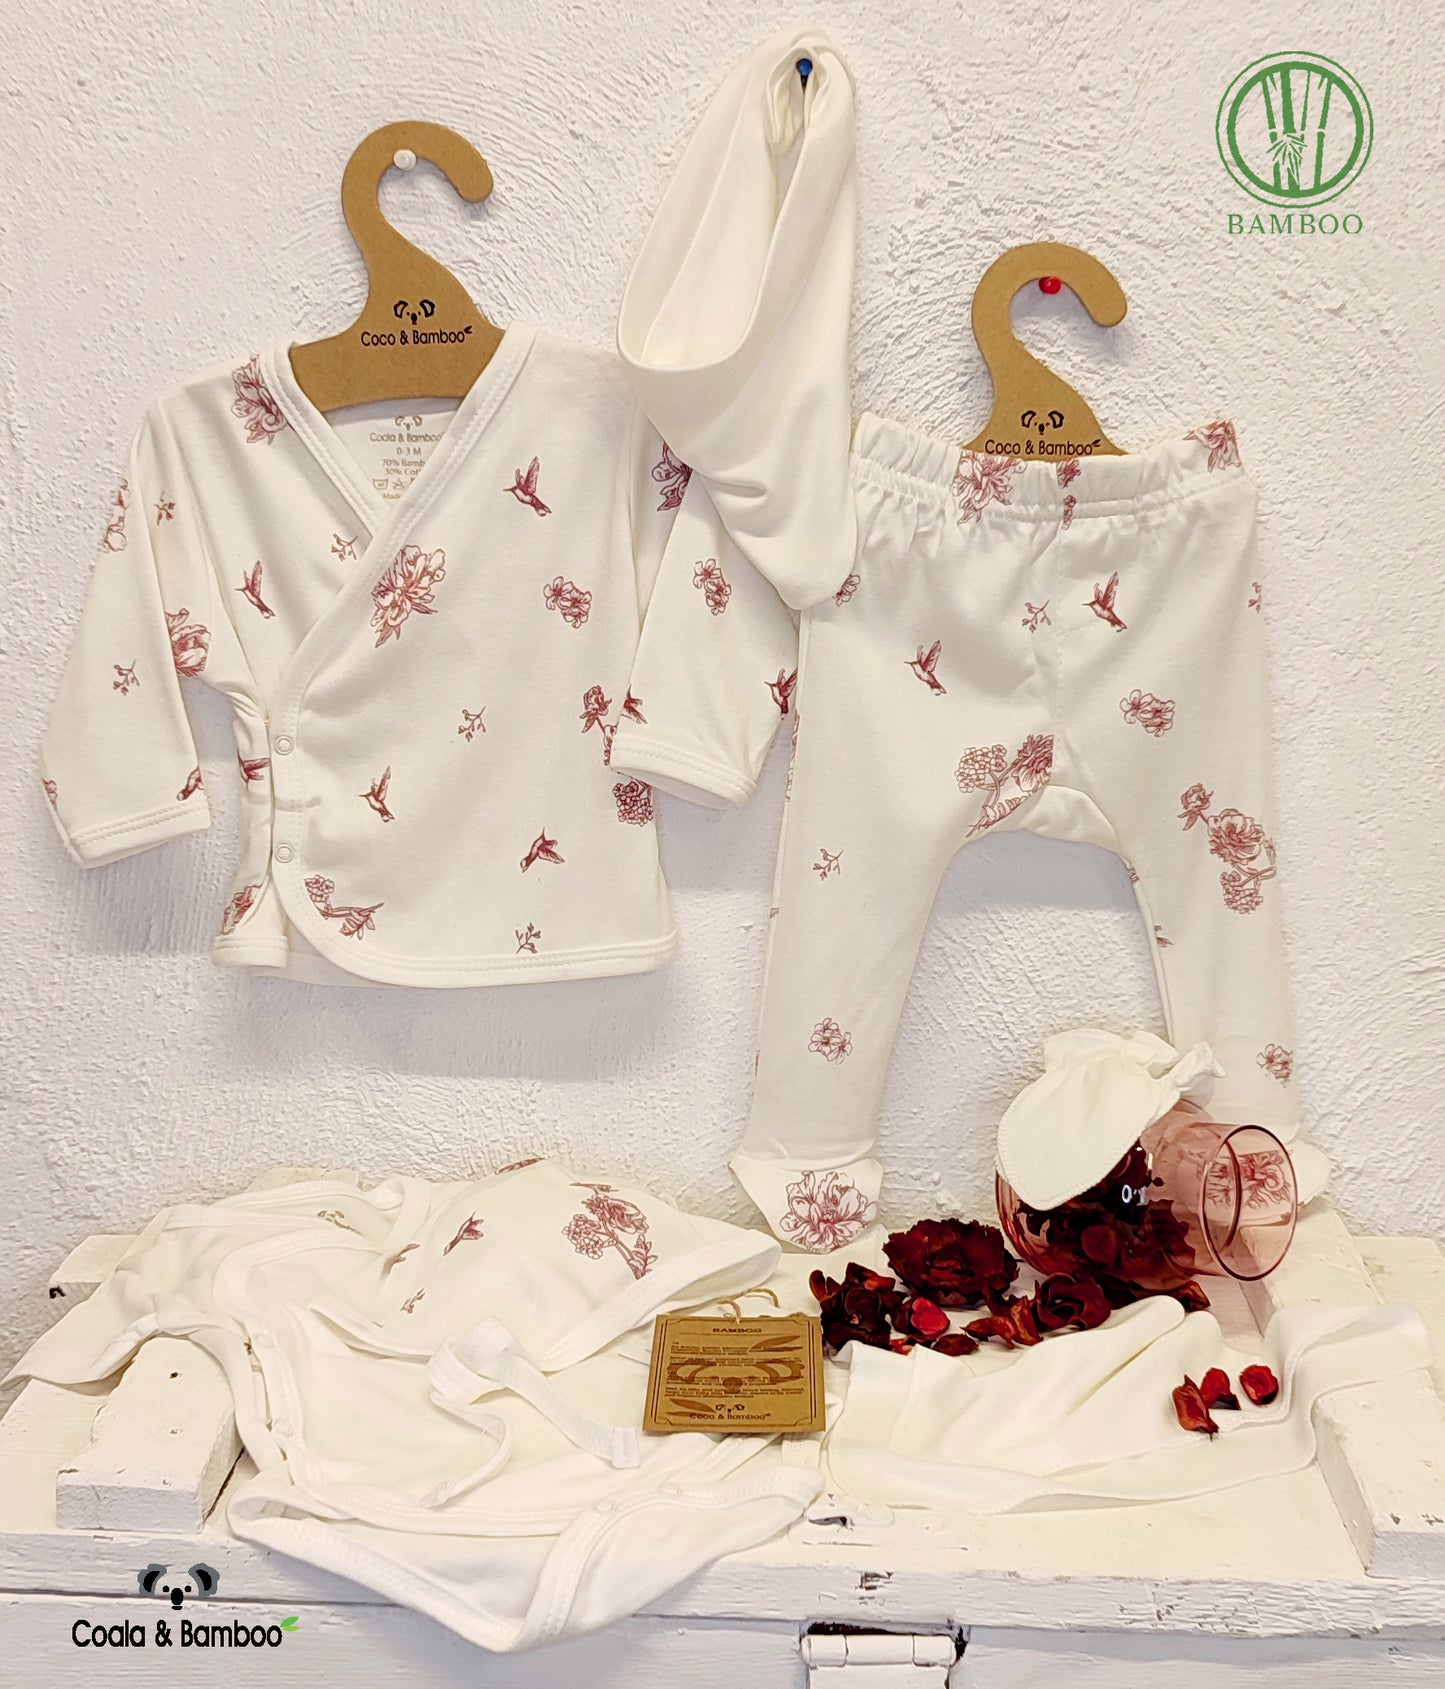 A must have unisex Newborn baby set, includes: Booted bottom, cruise, body, hat, bib, glove, hand towel and special bag.  can be a great gift for baby shower.